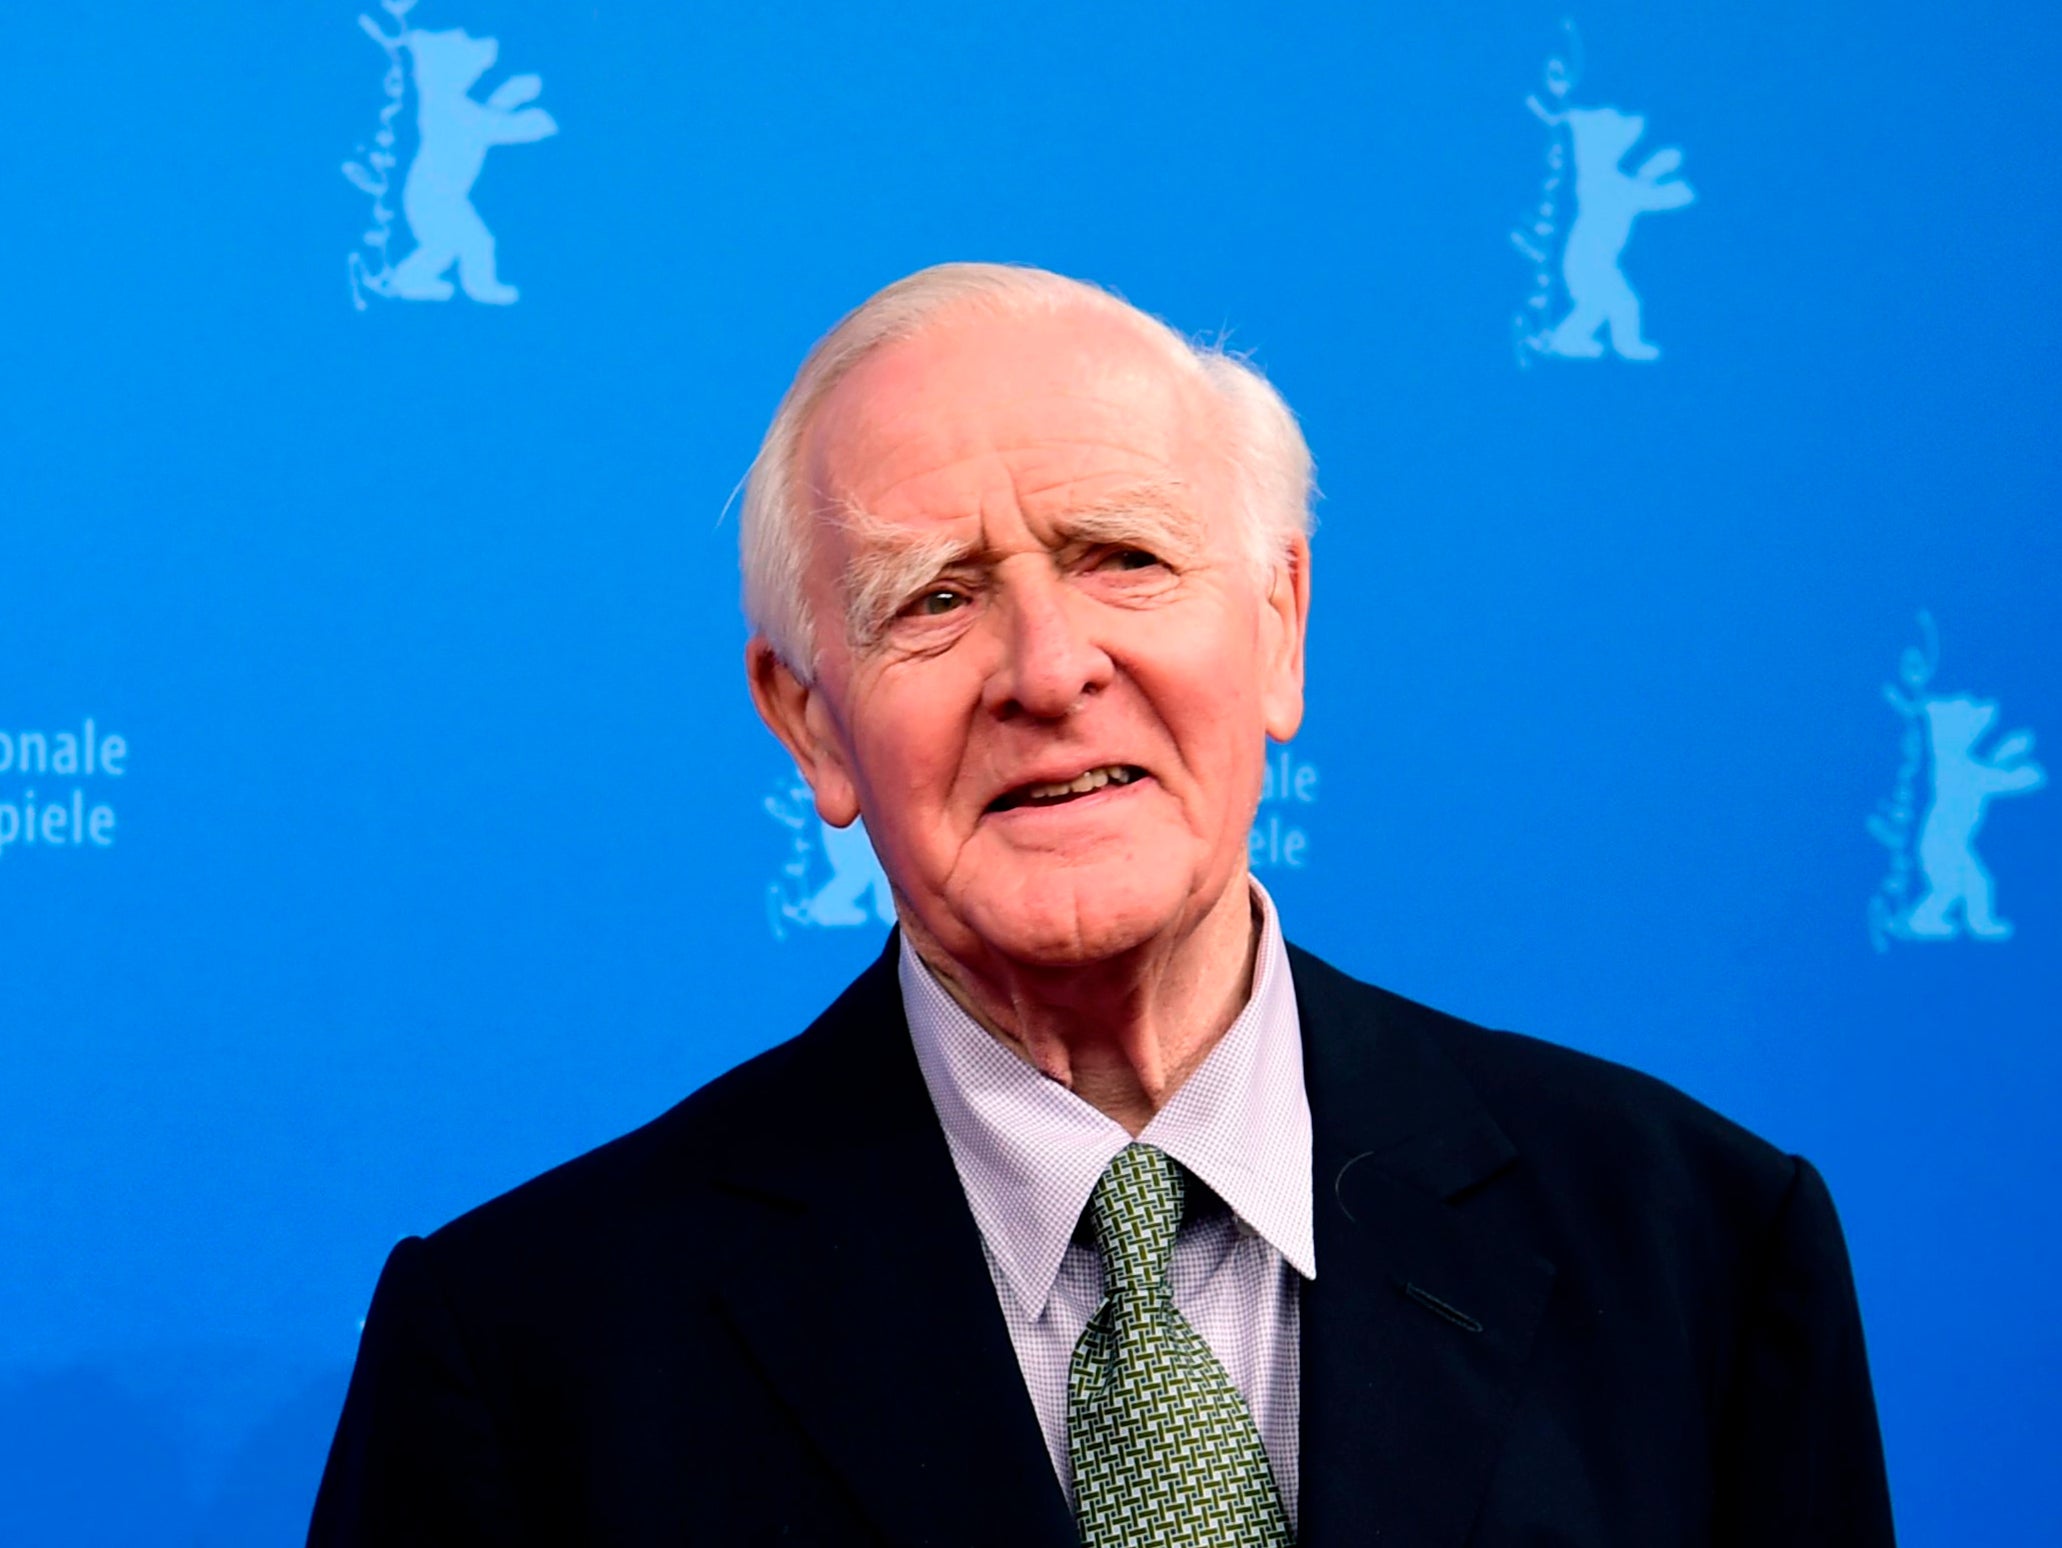 Ten of John le Carré's exquisitely written novels were adapted to film